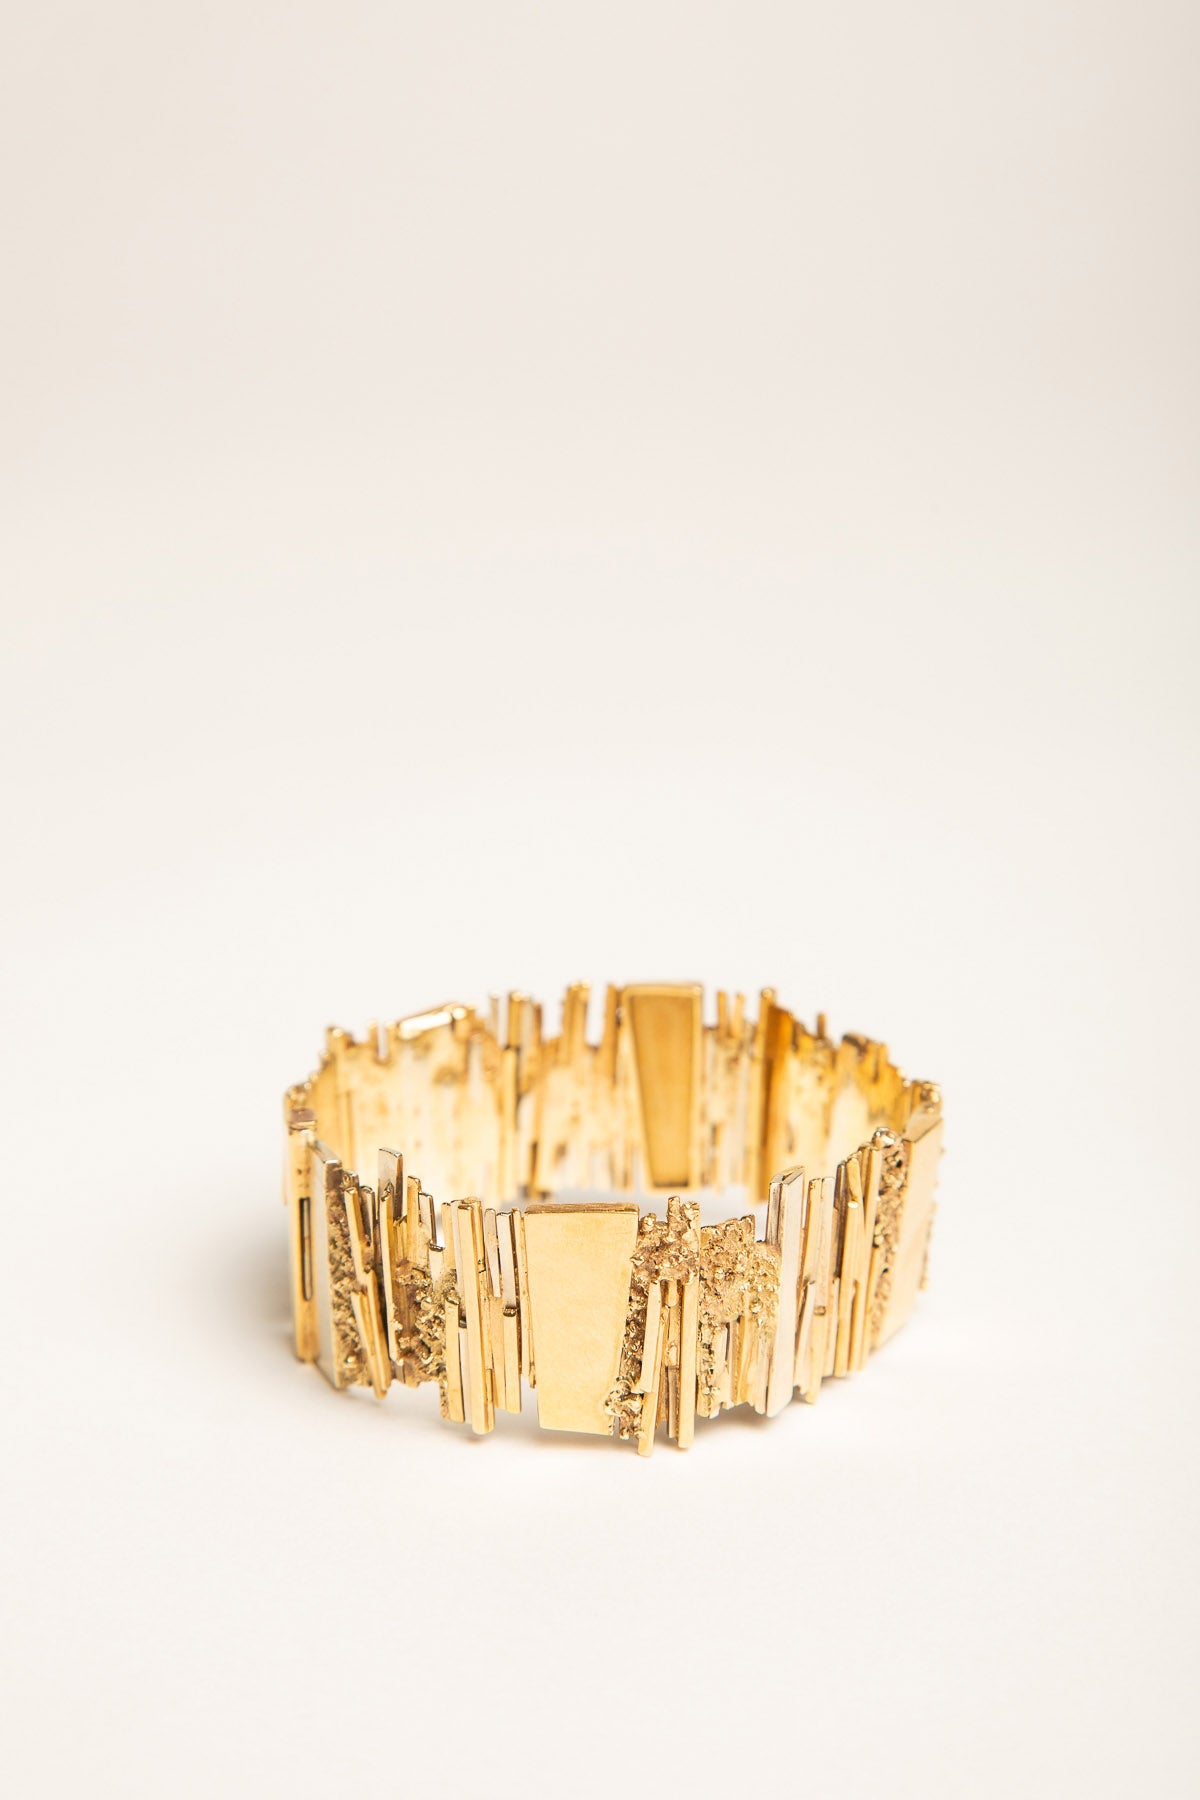 MAXFIELD PRIVATE COLLECTION | 1960'S GOLD MODERN BRACELET